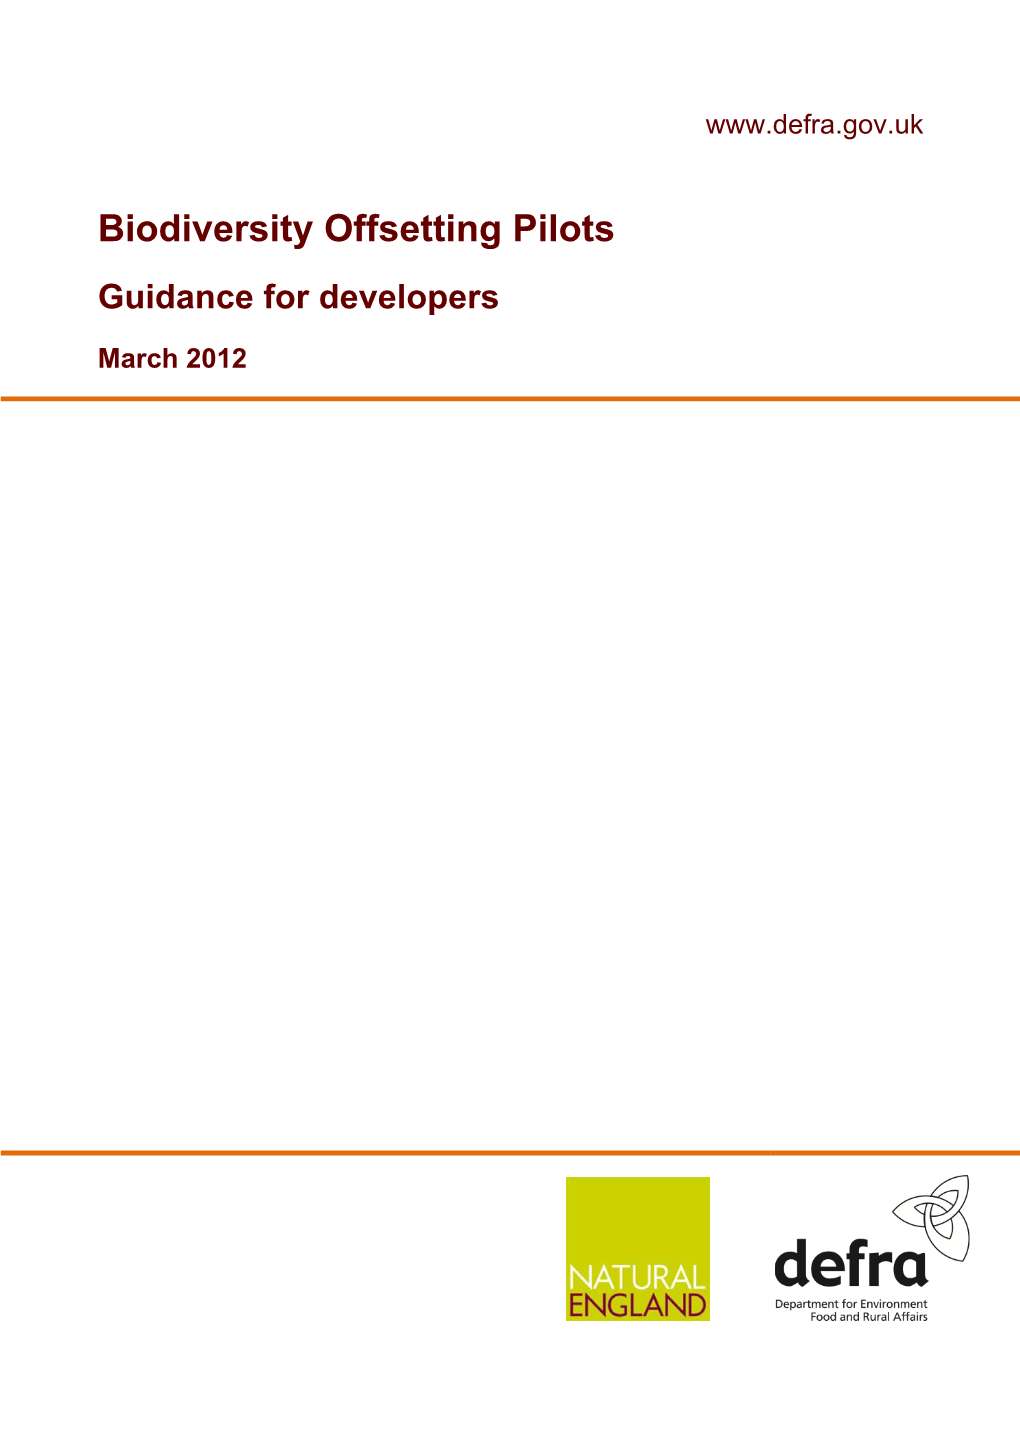 Biodiversity Offsetting Pilots Guidance for Developers